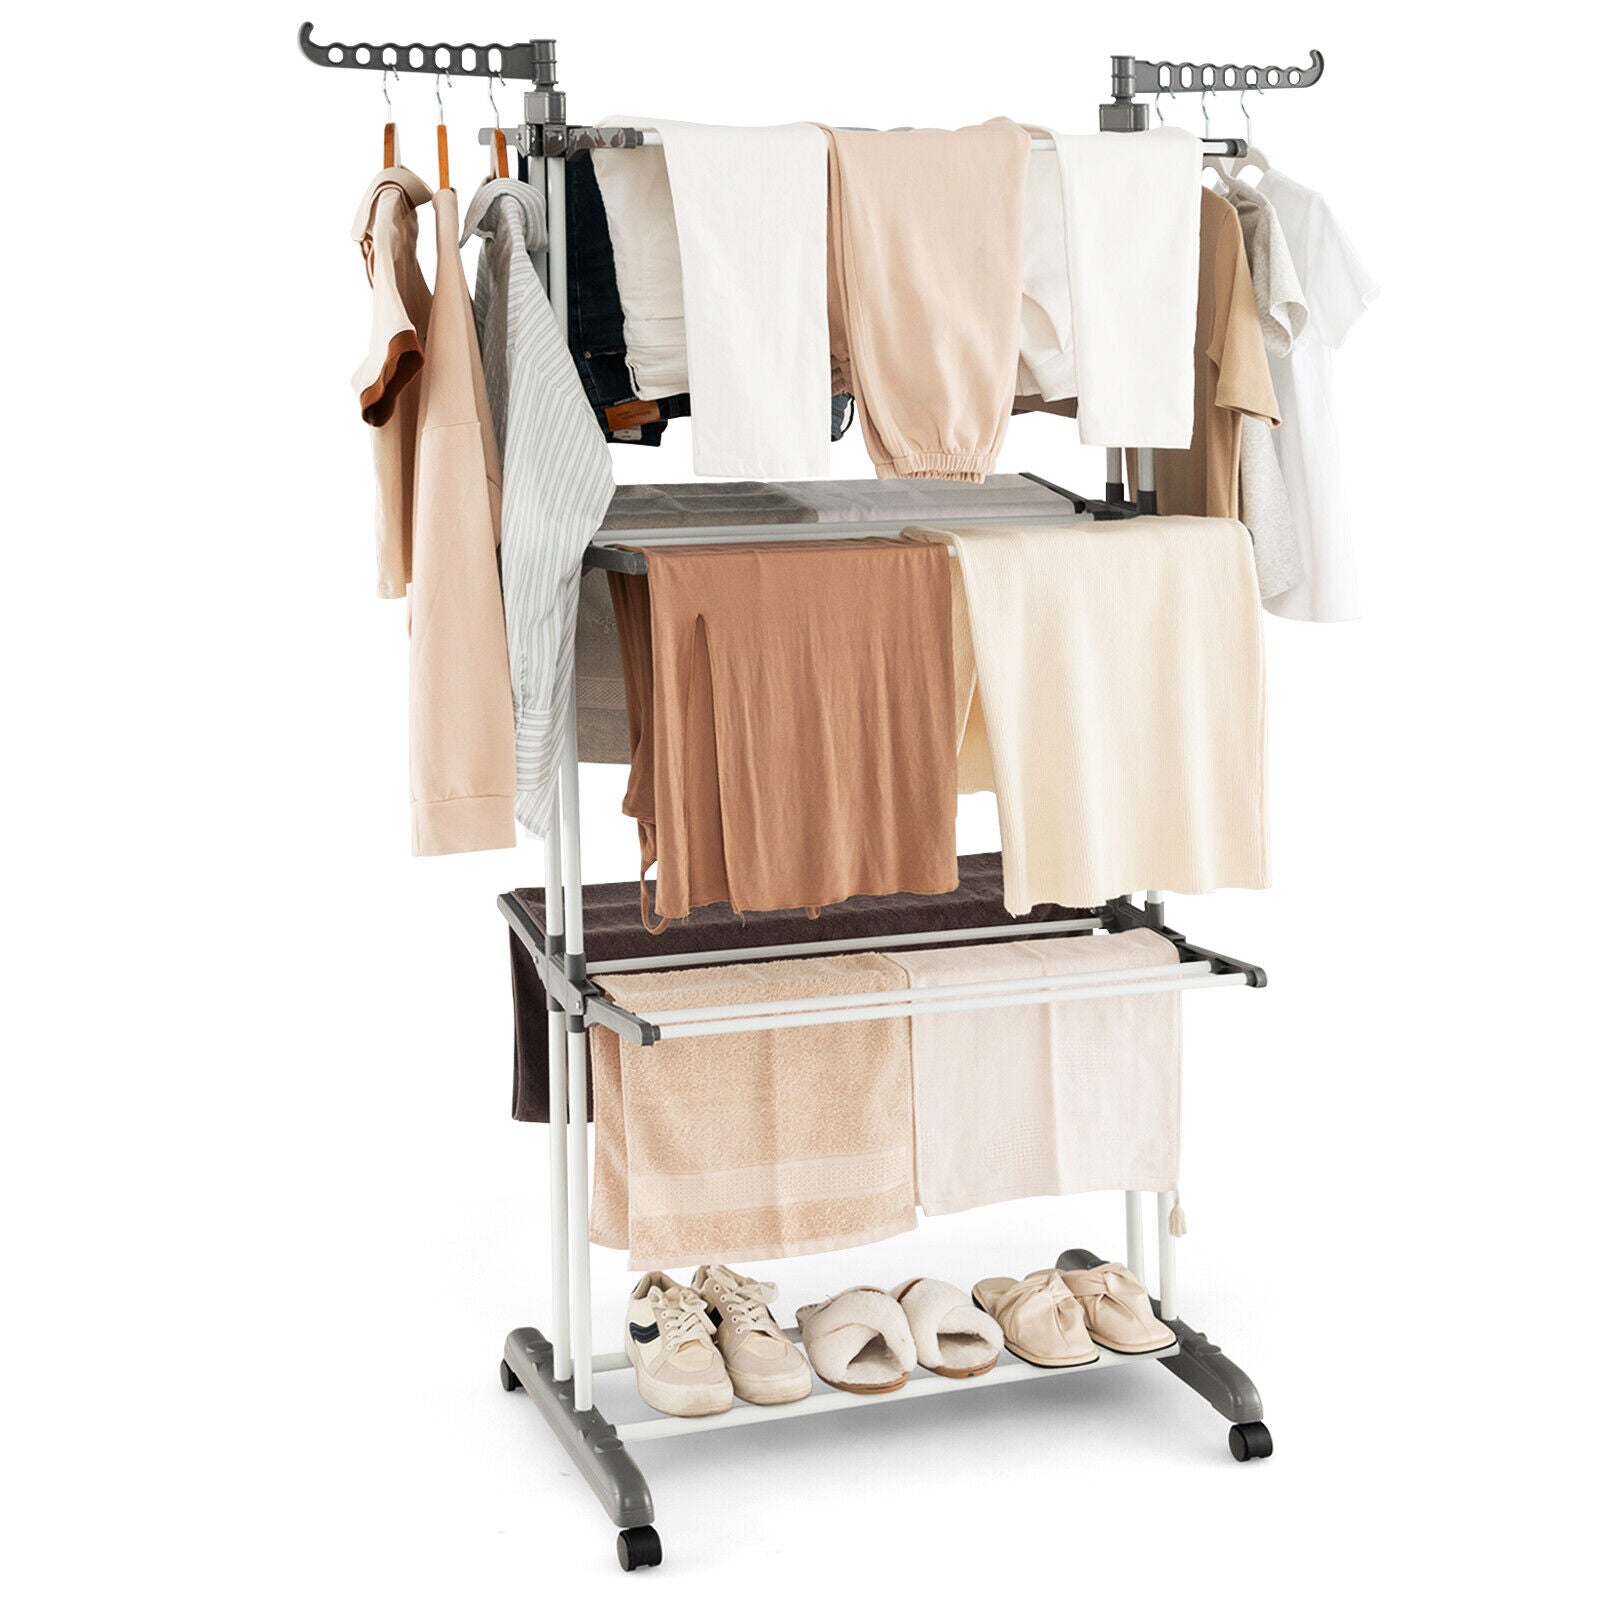 Folding Drying Rack for Clothes 3-Tier Shelf w/ Adjustable Side Wings